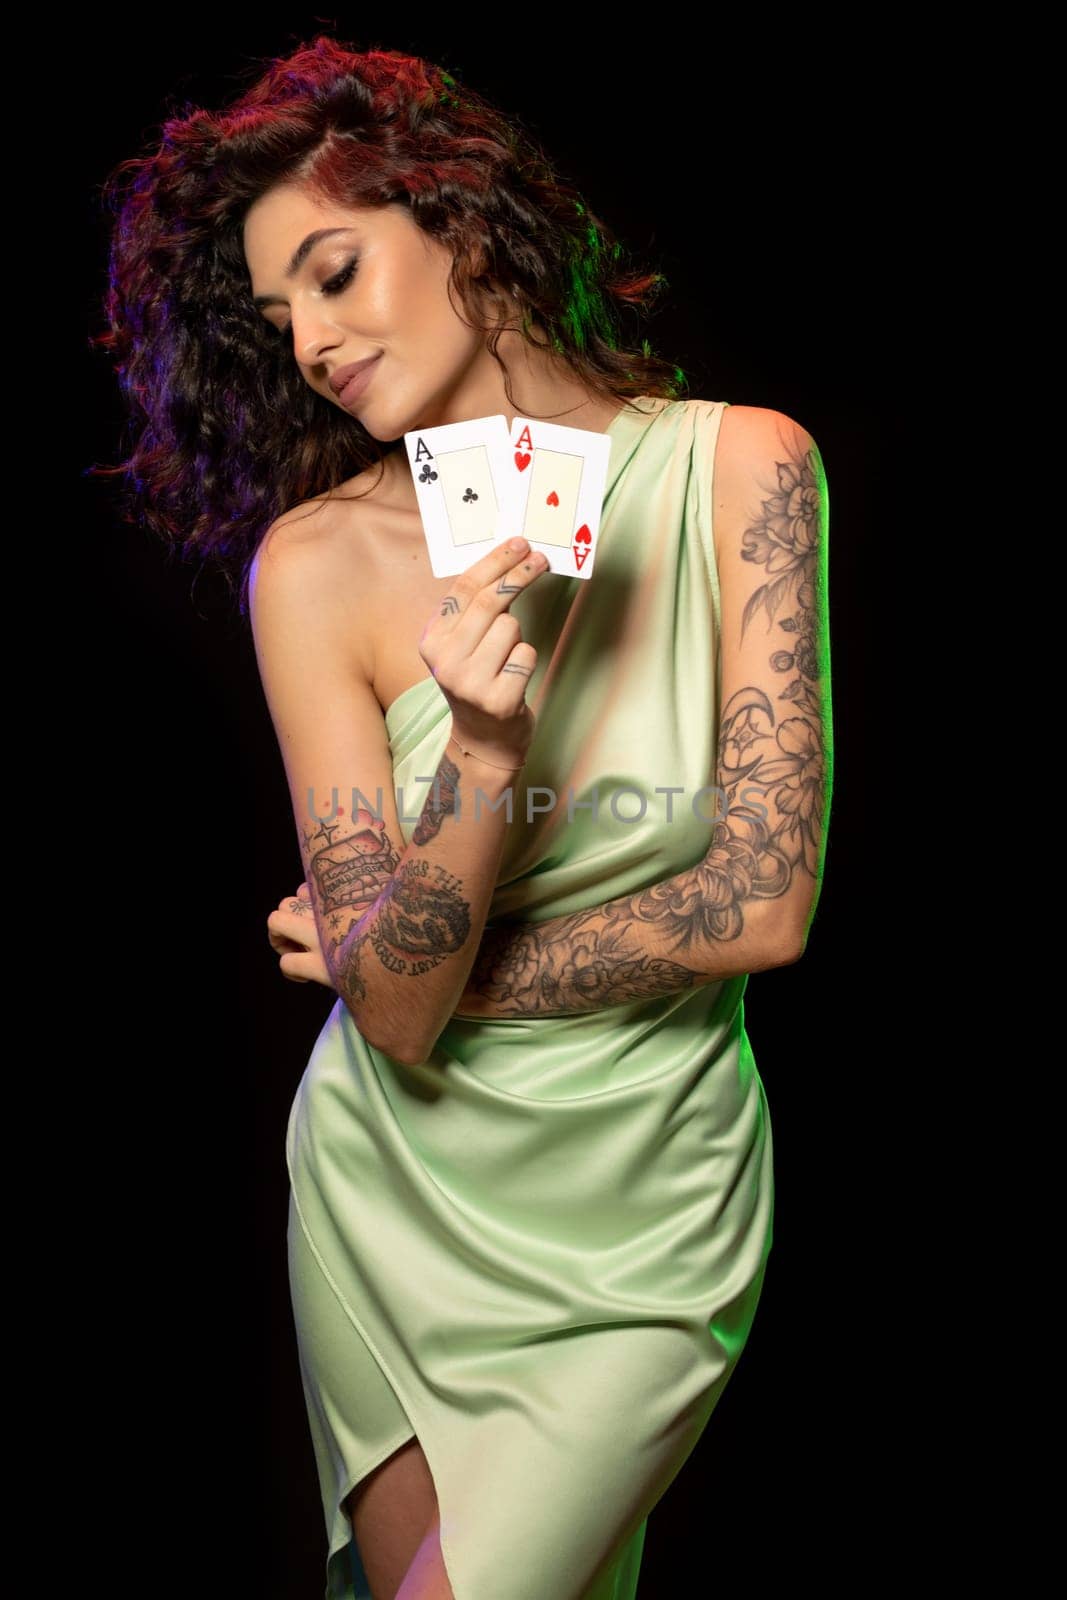 Smiling young woman with tattoo on arms showing pair of aces by nazarovsergey